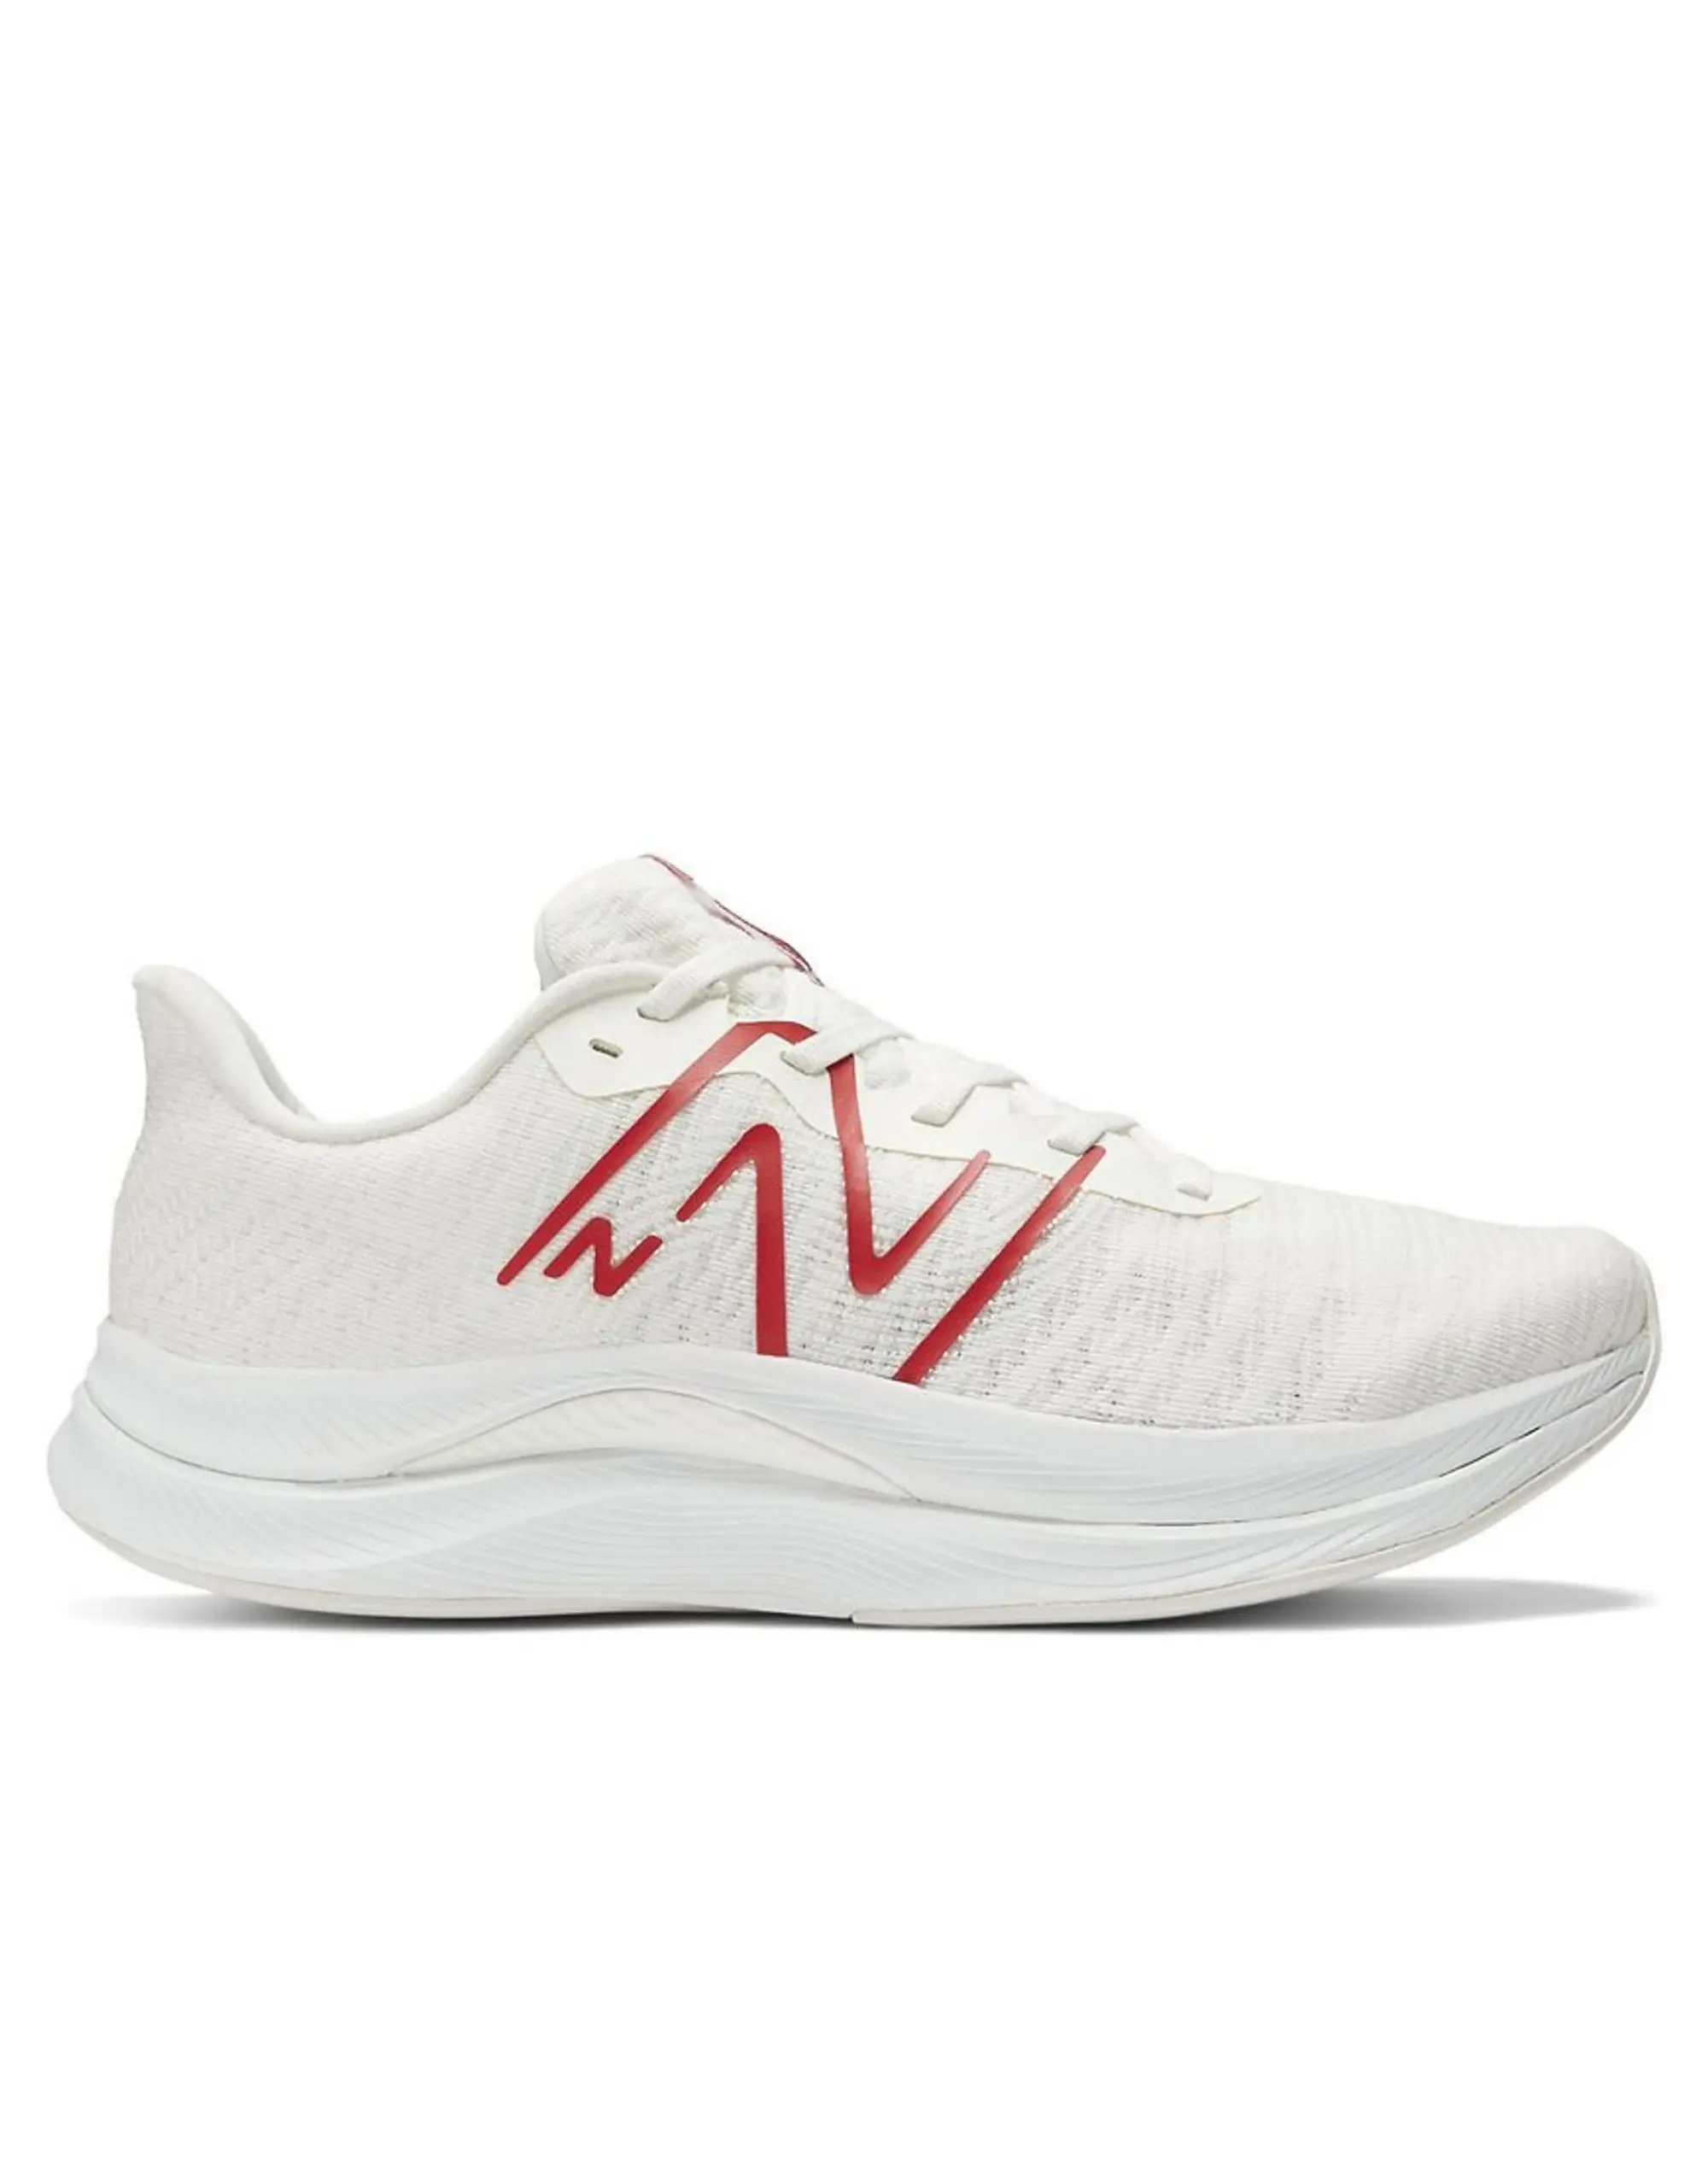 New Balance Fuelcell Propel V4 Trainers In White